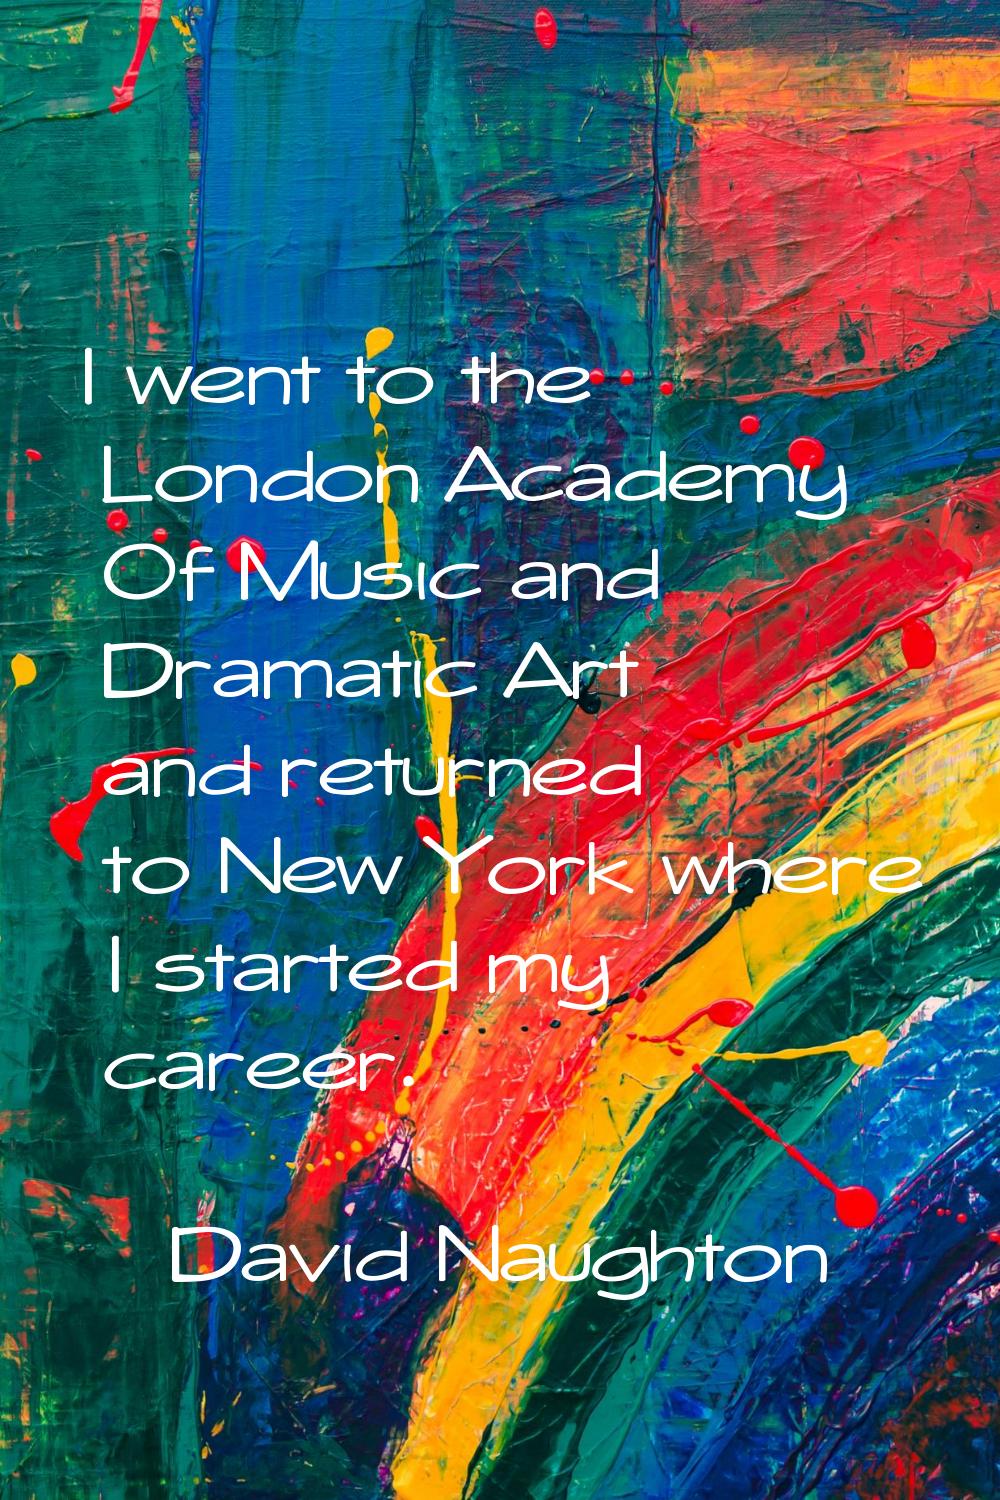 I went to the London Academy Of Music and Dramatic Art and returned to New York where I started my 